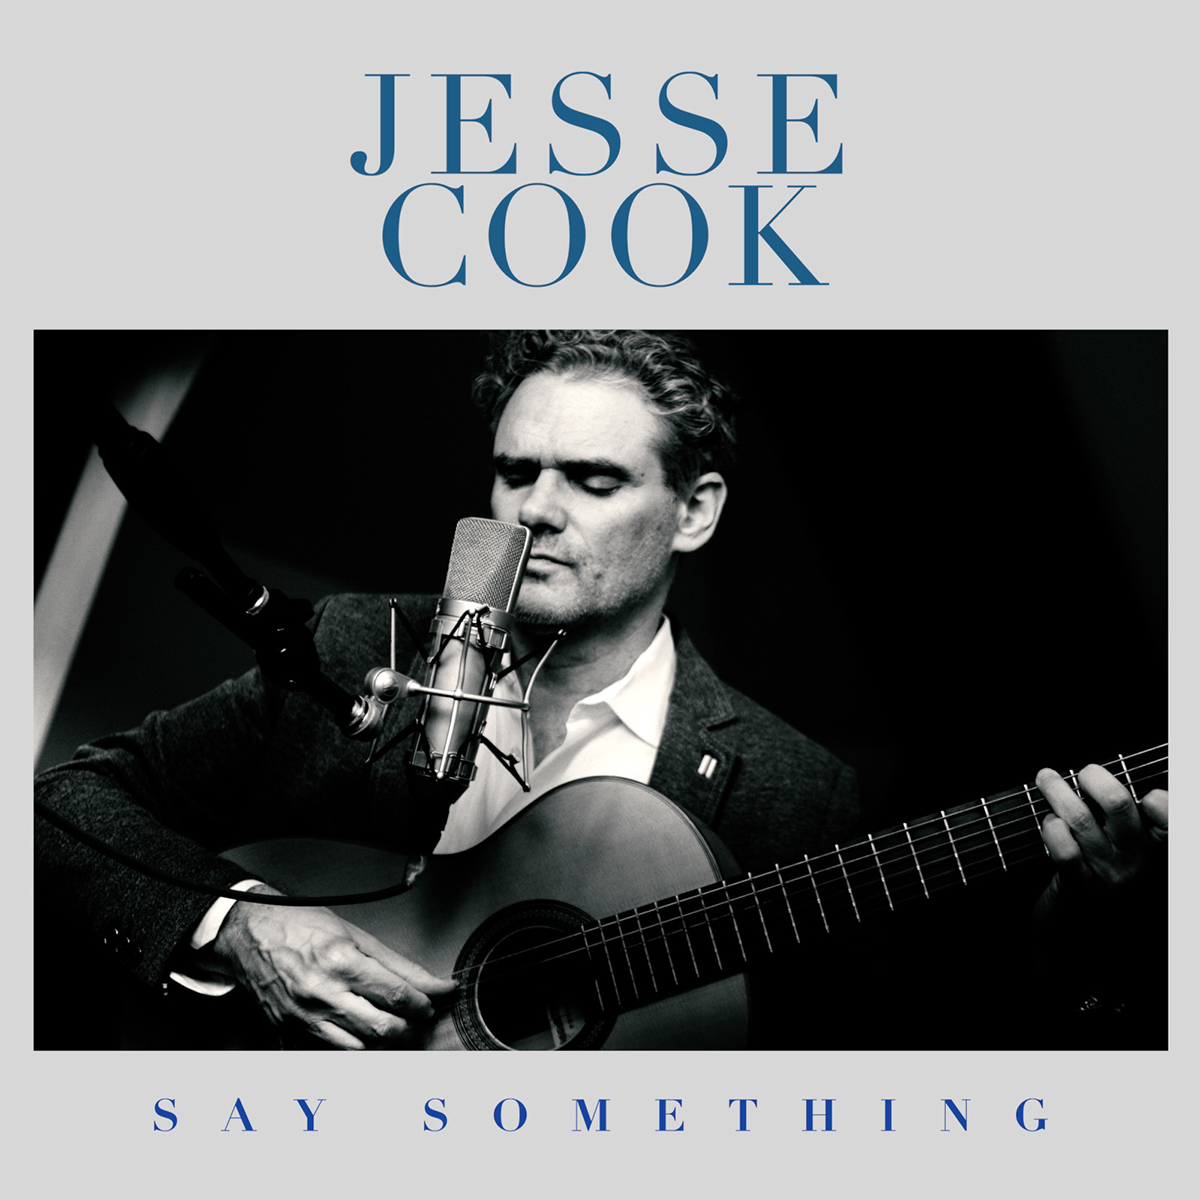 Internationally Acclaimed Guitarist, Composer & Producer JESSE COOK Releases Stunning Version of “Say Something”